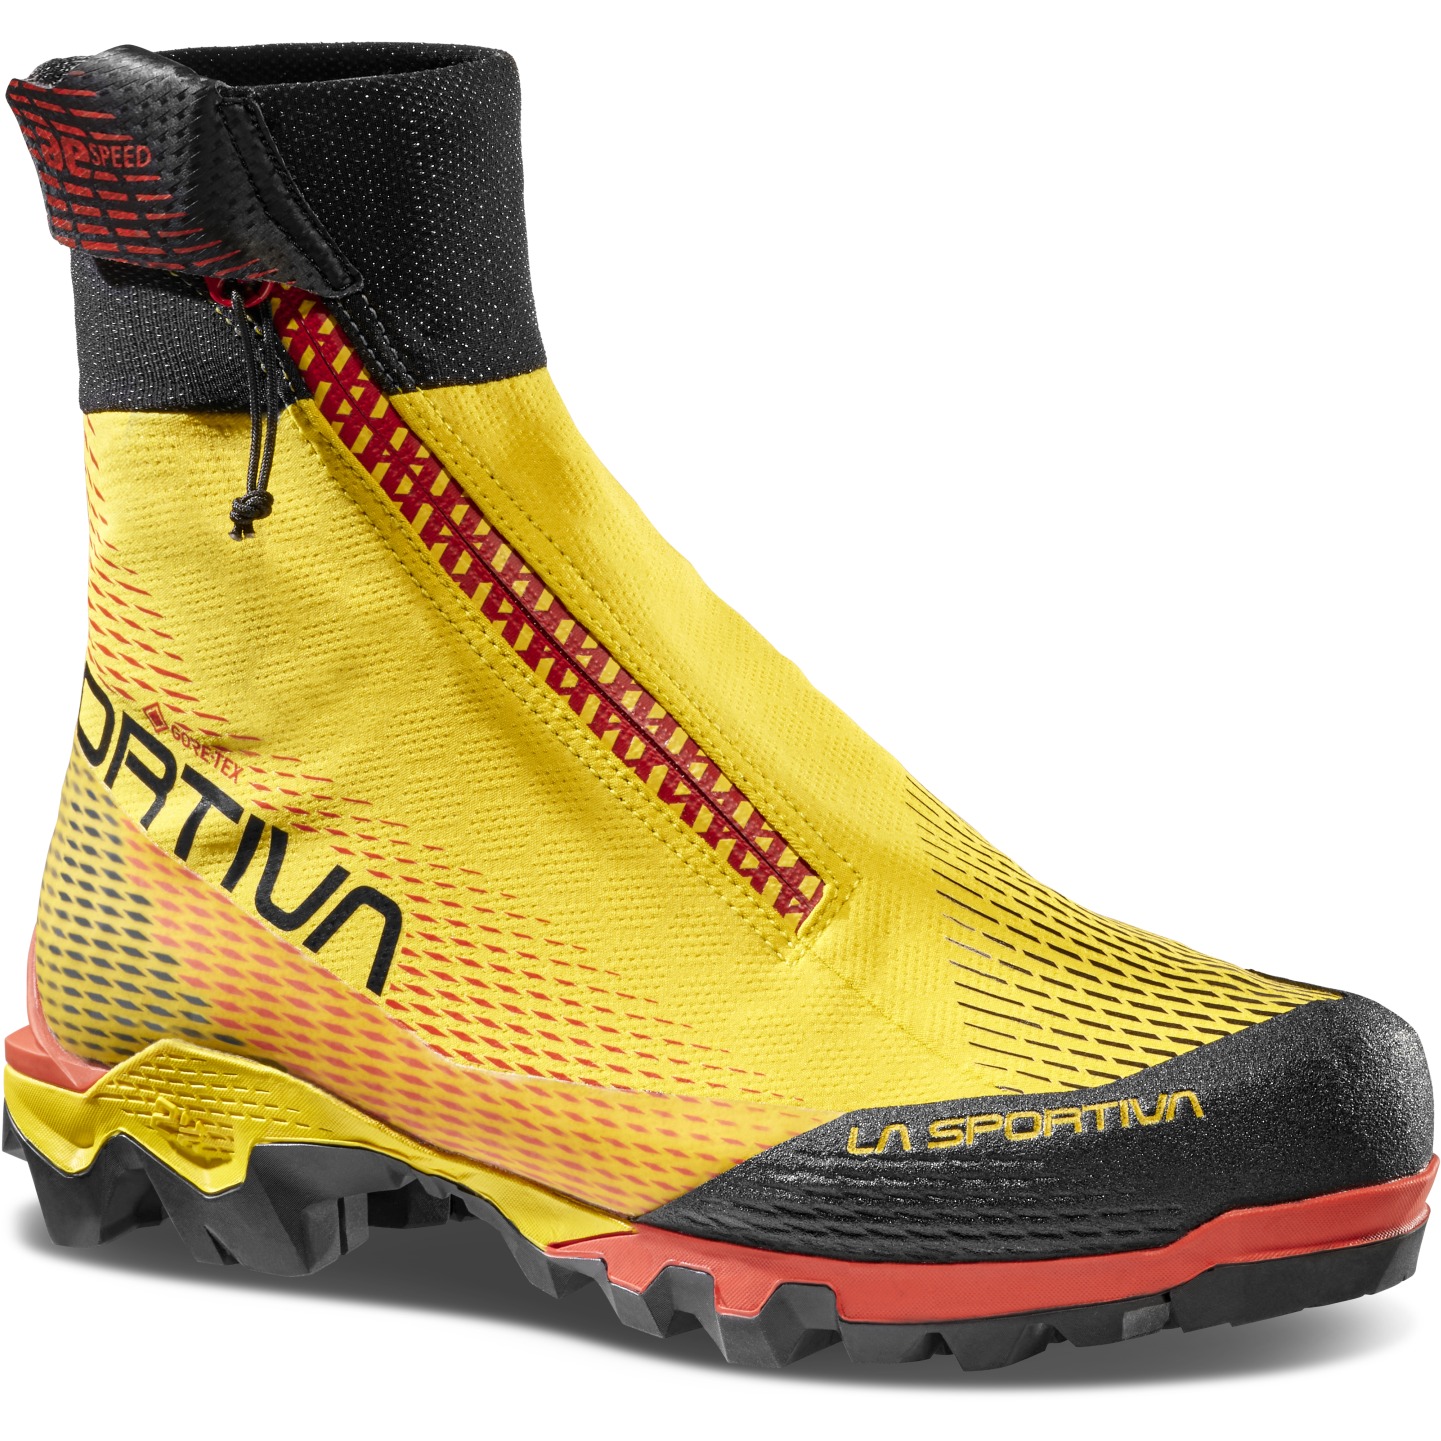 Picture of La Sportiva Aequilibrium Speed GTX Approach Shoes Men - Yellow/Black